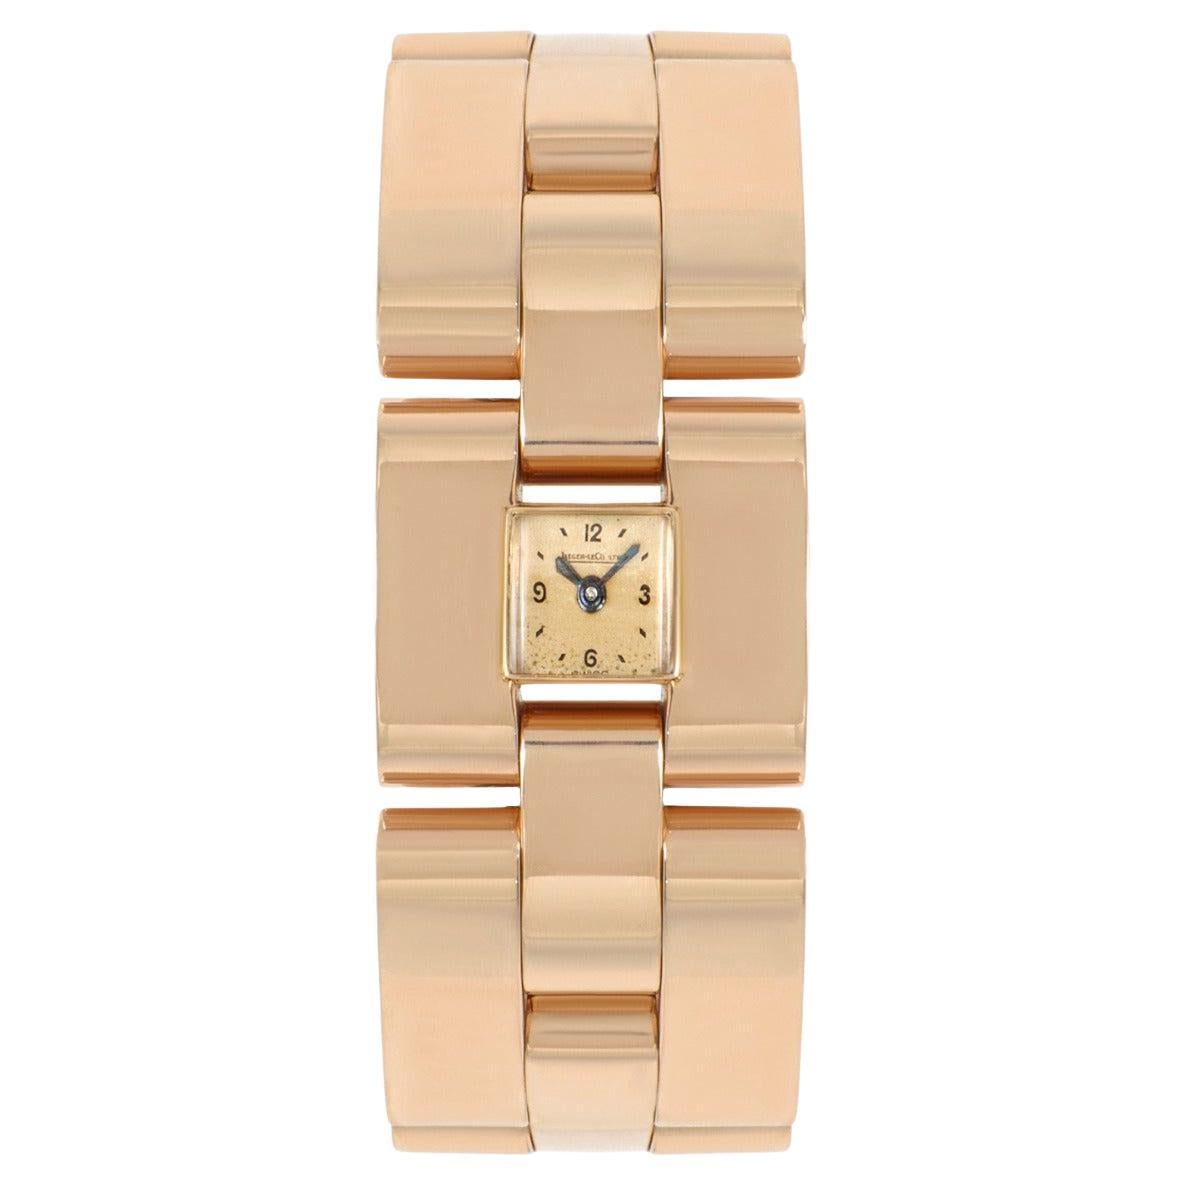 Jaeger LeCoultre Vintage Women's Dress Watch 18K Rose Gold Champagne Dial For Sale